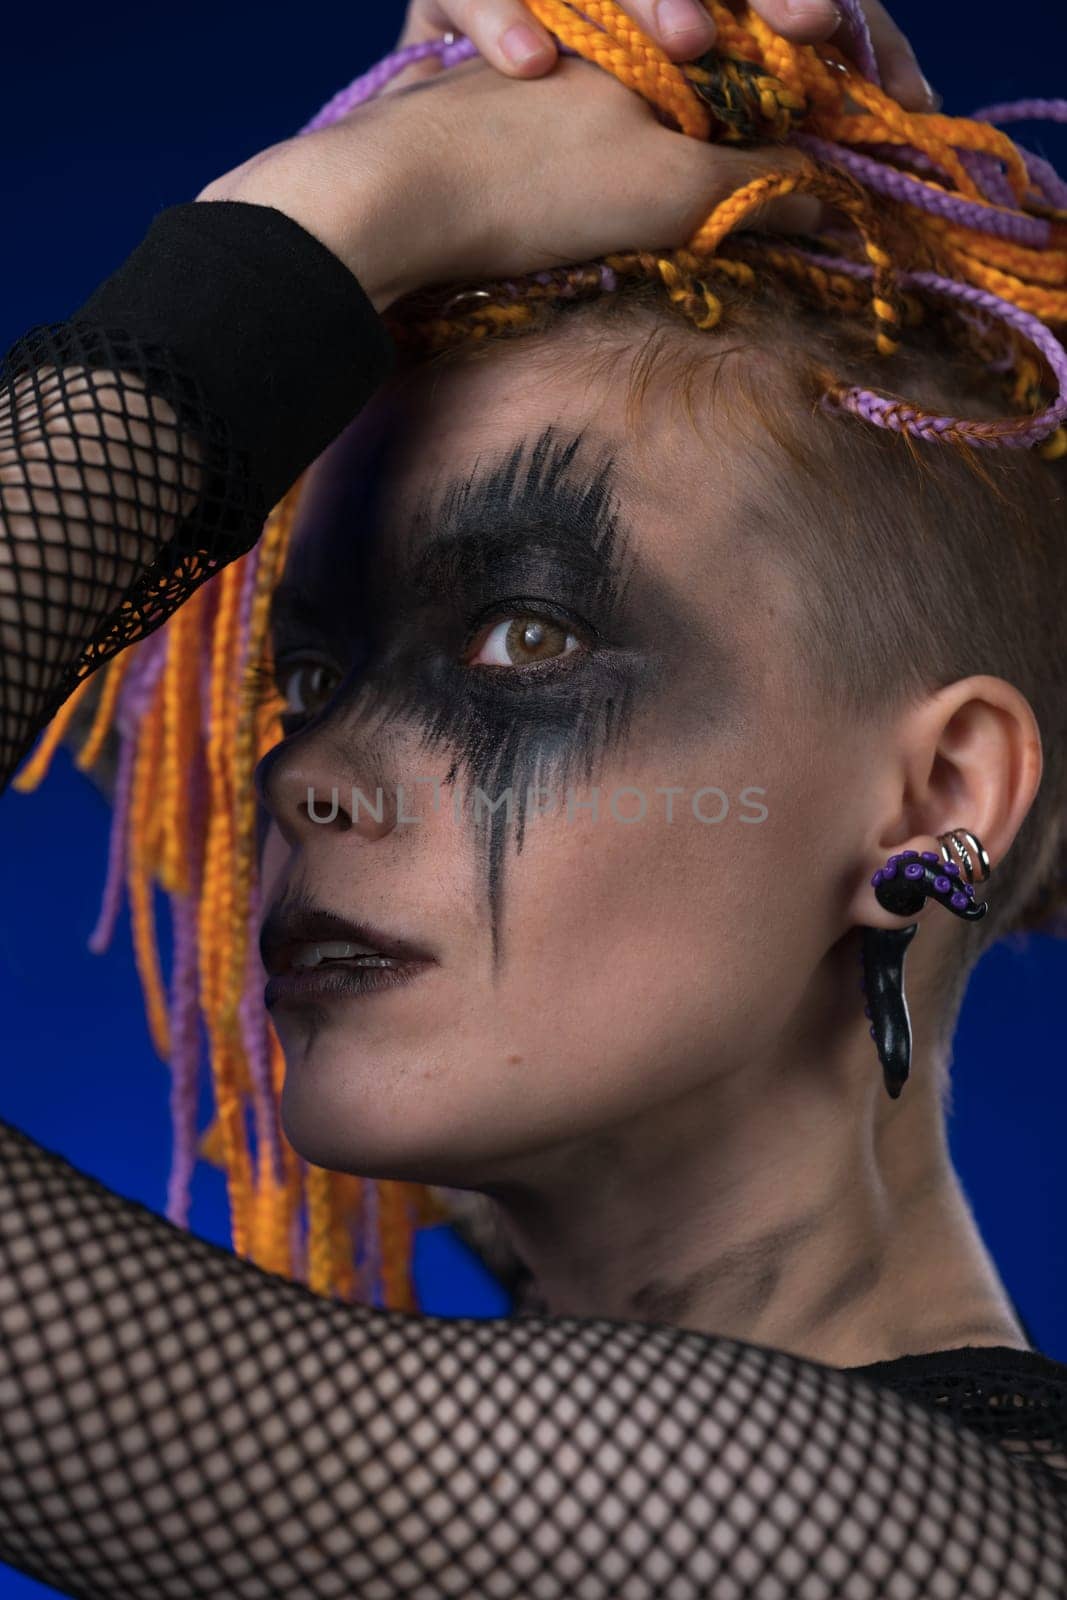 Fine art portrait of beauty young woman with colored without dangerous dreadlocks hairstyle and spooky black stage make-up painted on face. Studio shot on blue background. Part of photo series